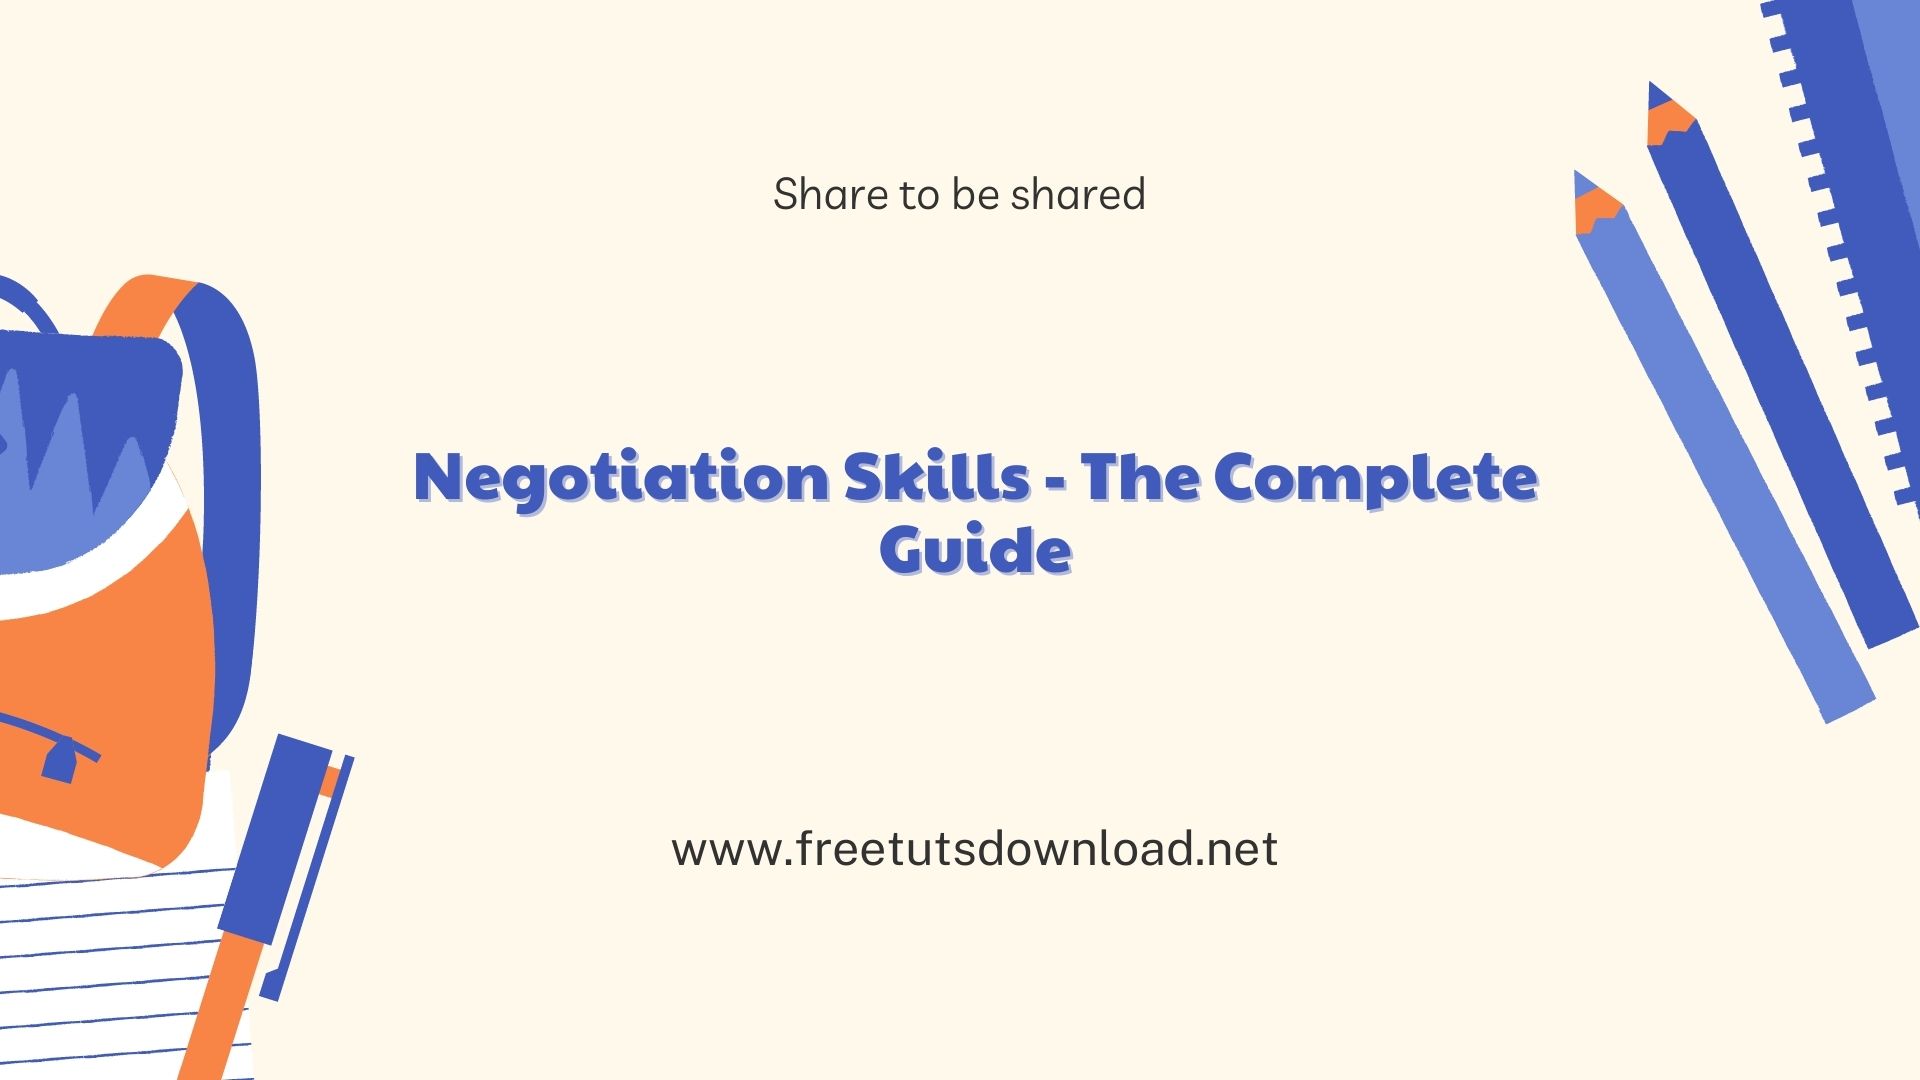 Negotiation Skills - The Complete Guide